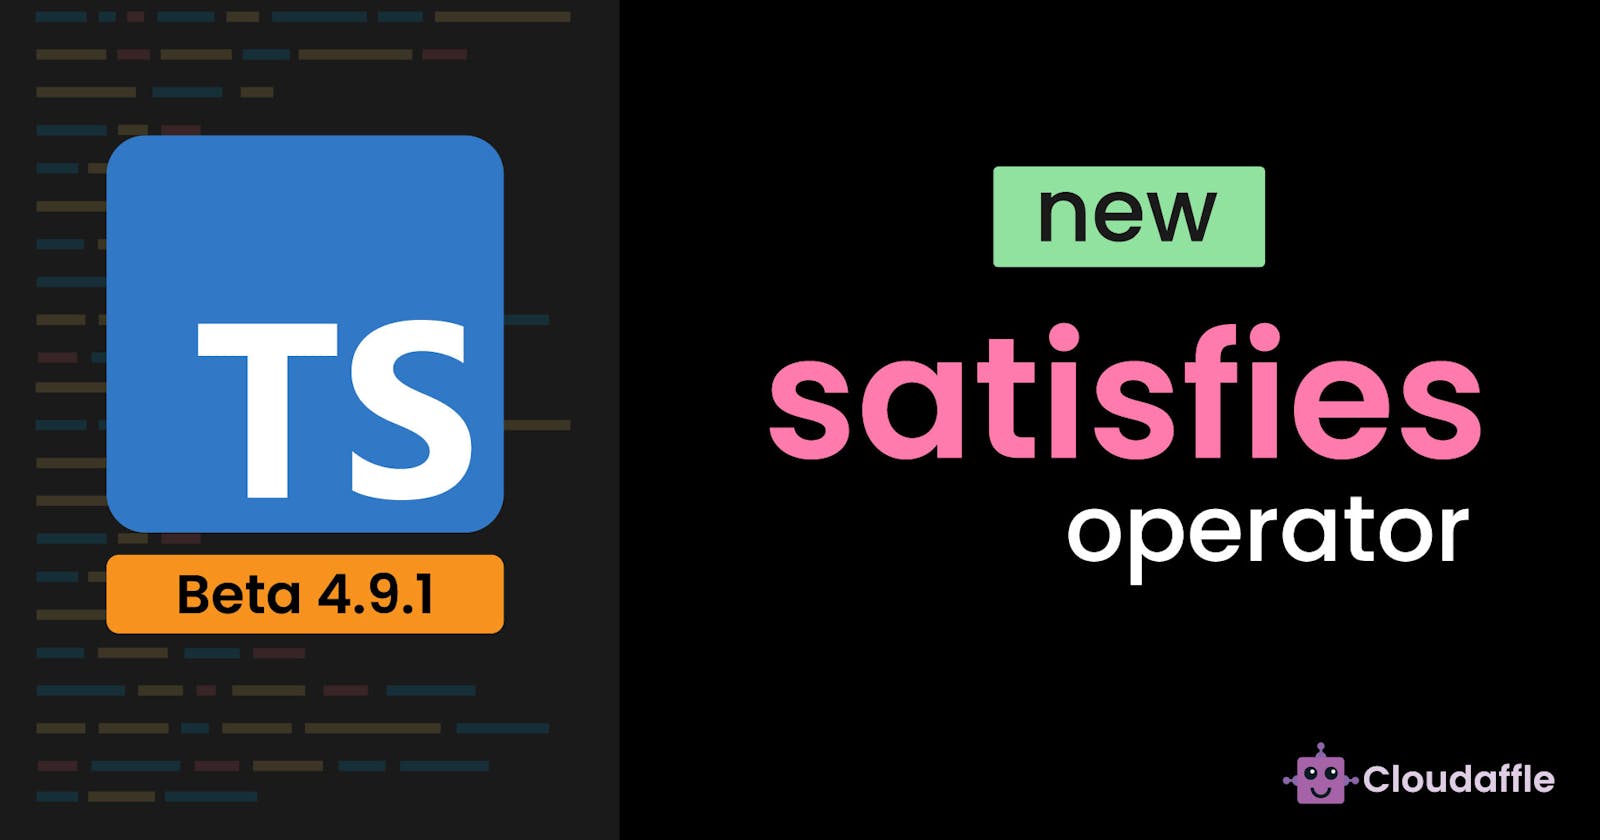 The New Satisfies Operator Will Satisfy You (Cheesy)